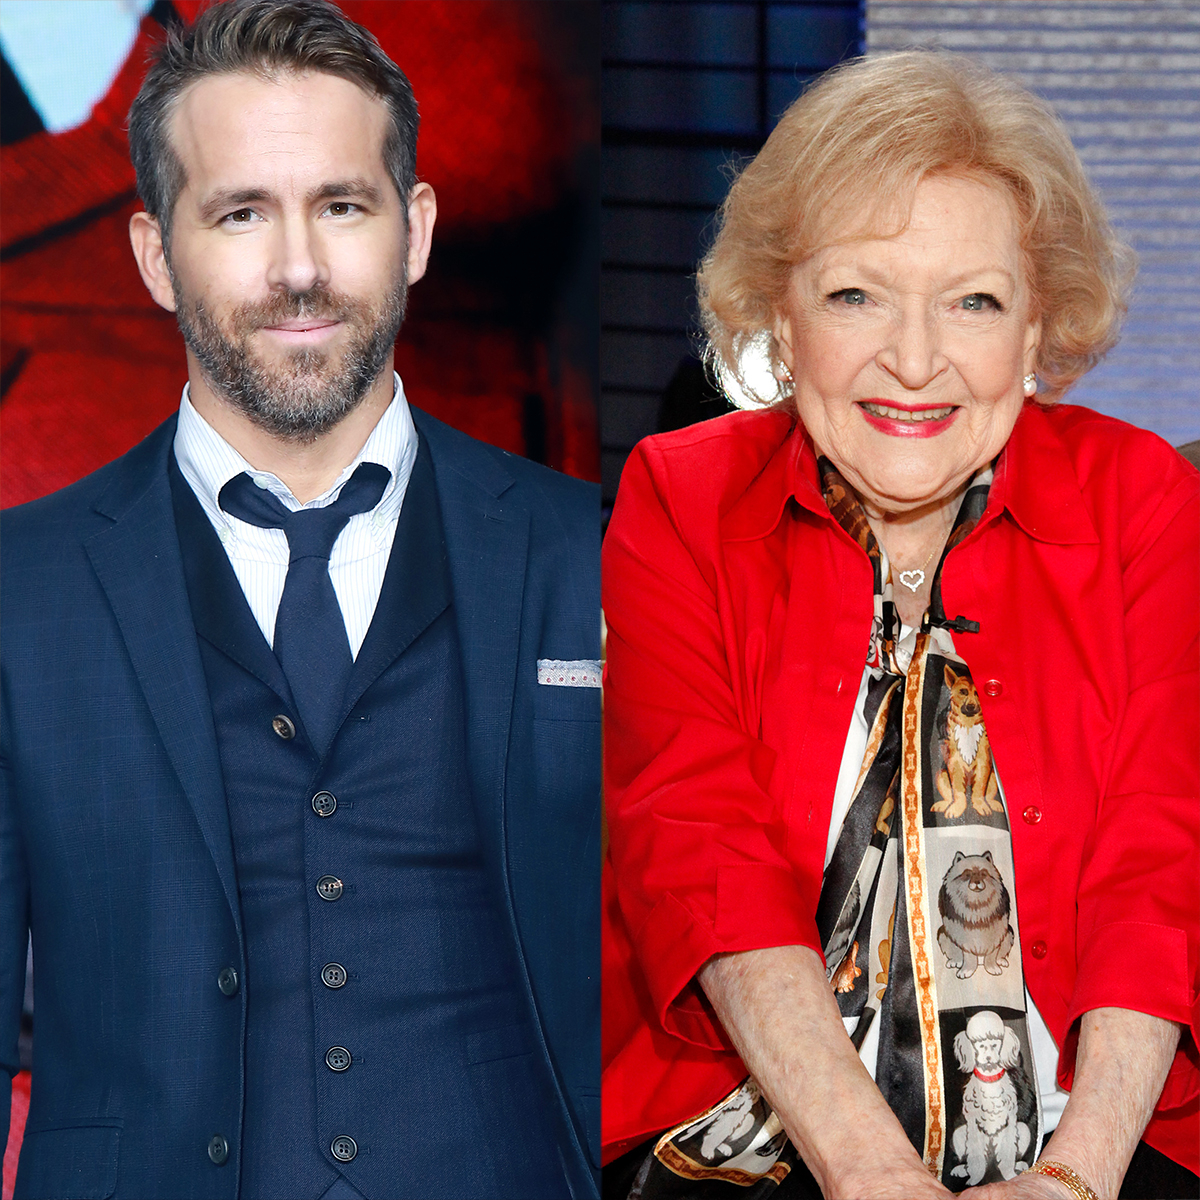 https://akns-images.eonline.com/eol_images/Entire_Site/20211130/rs_1200x1200-211230035704-1200-Ryan-Reynolds-Betty-White-123021-Split.jpg?fit=around%7C1080:540&output-quality=90&crop=1080:540;center,top